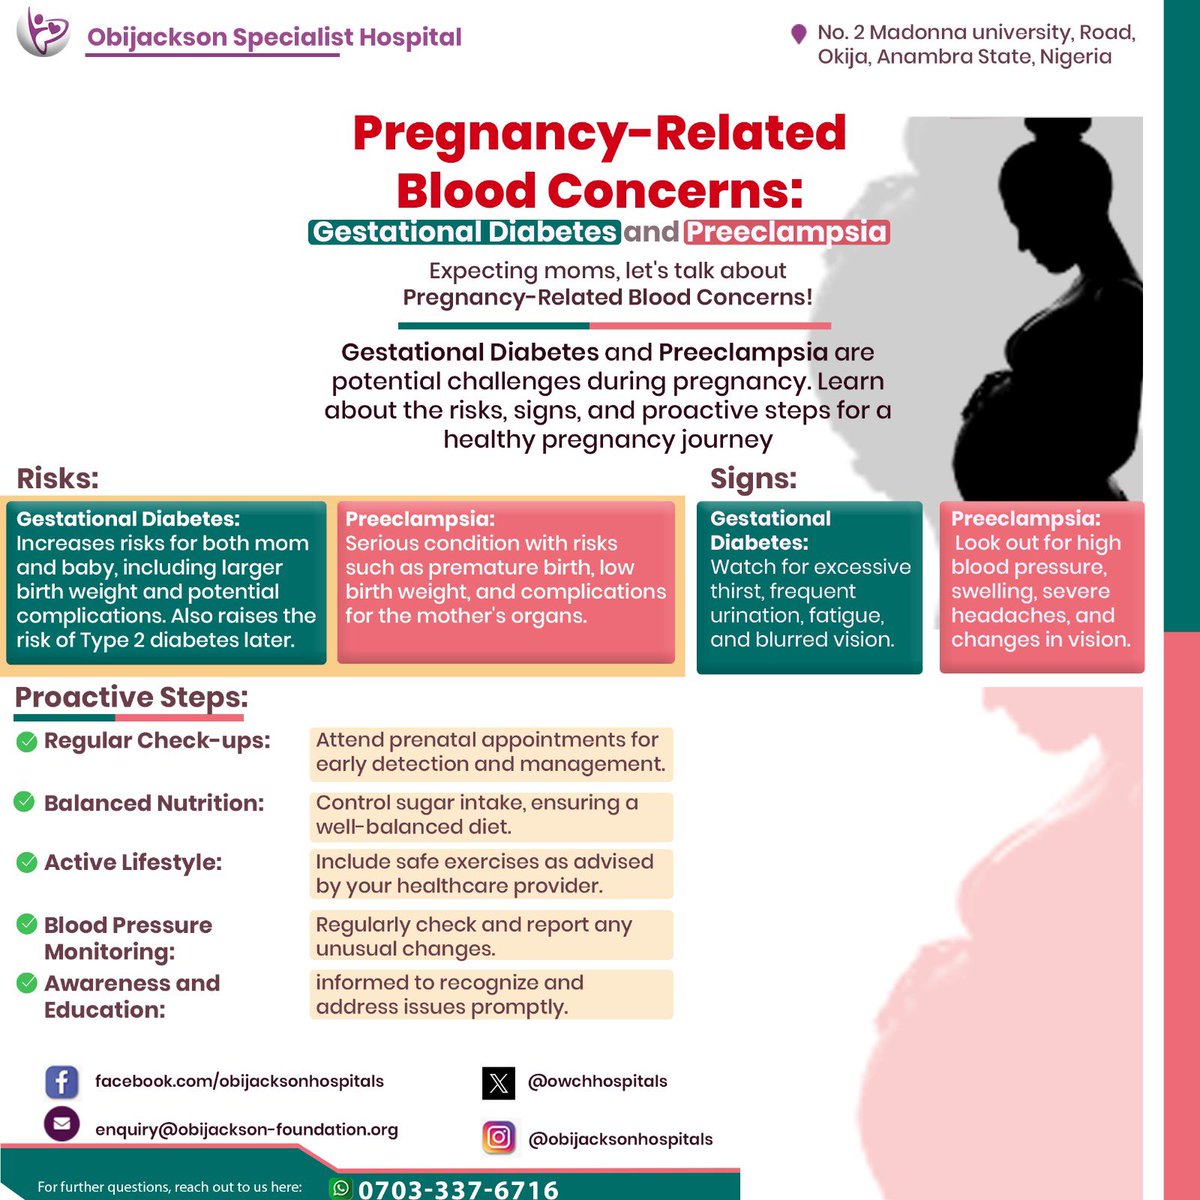 🤰🩸 Expecting moms, let's talk about Pregnancy-Related Blood Concerns! 👉 Gestational Diabetes and Preeclampsia are potential challenges during pregnancy. Learn about the risks, signs, and proactive steps for a healthy pregnancy journey. 💙🤍 #PregnancyHealth #HealthyPregnancy